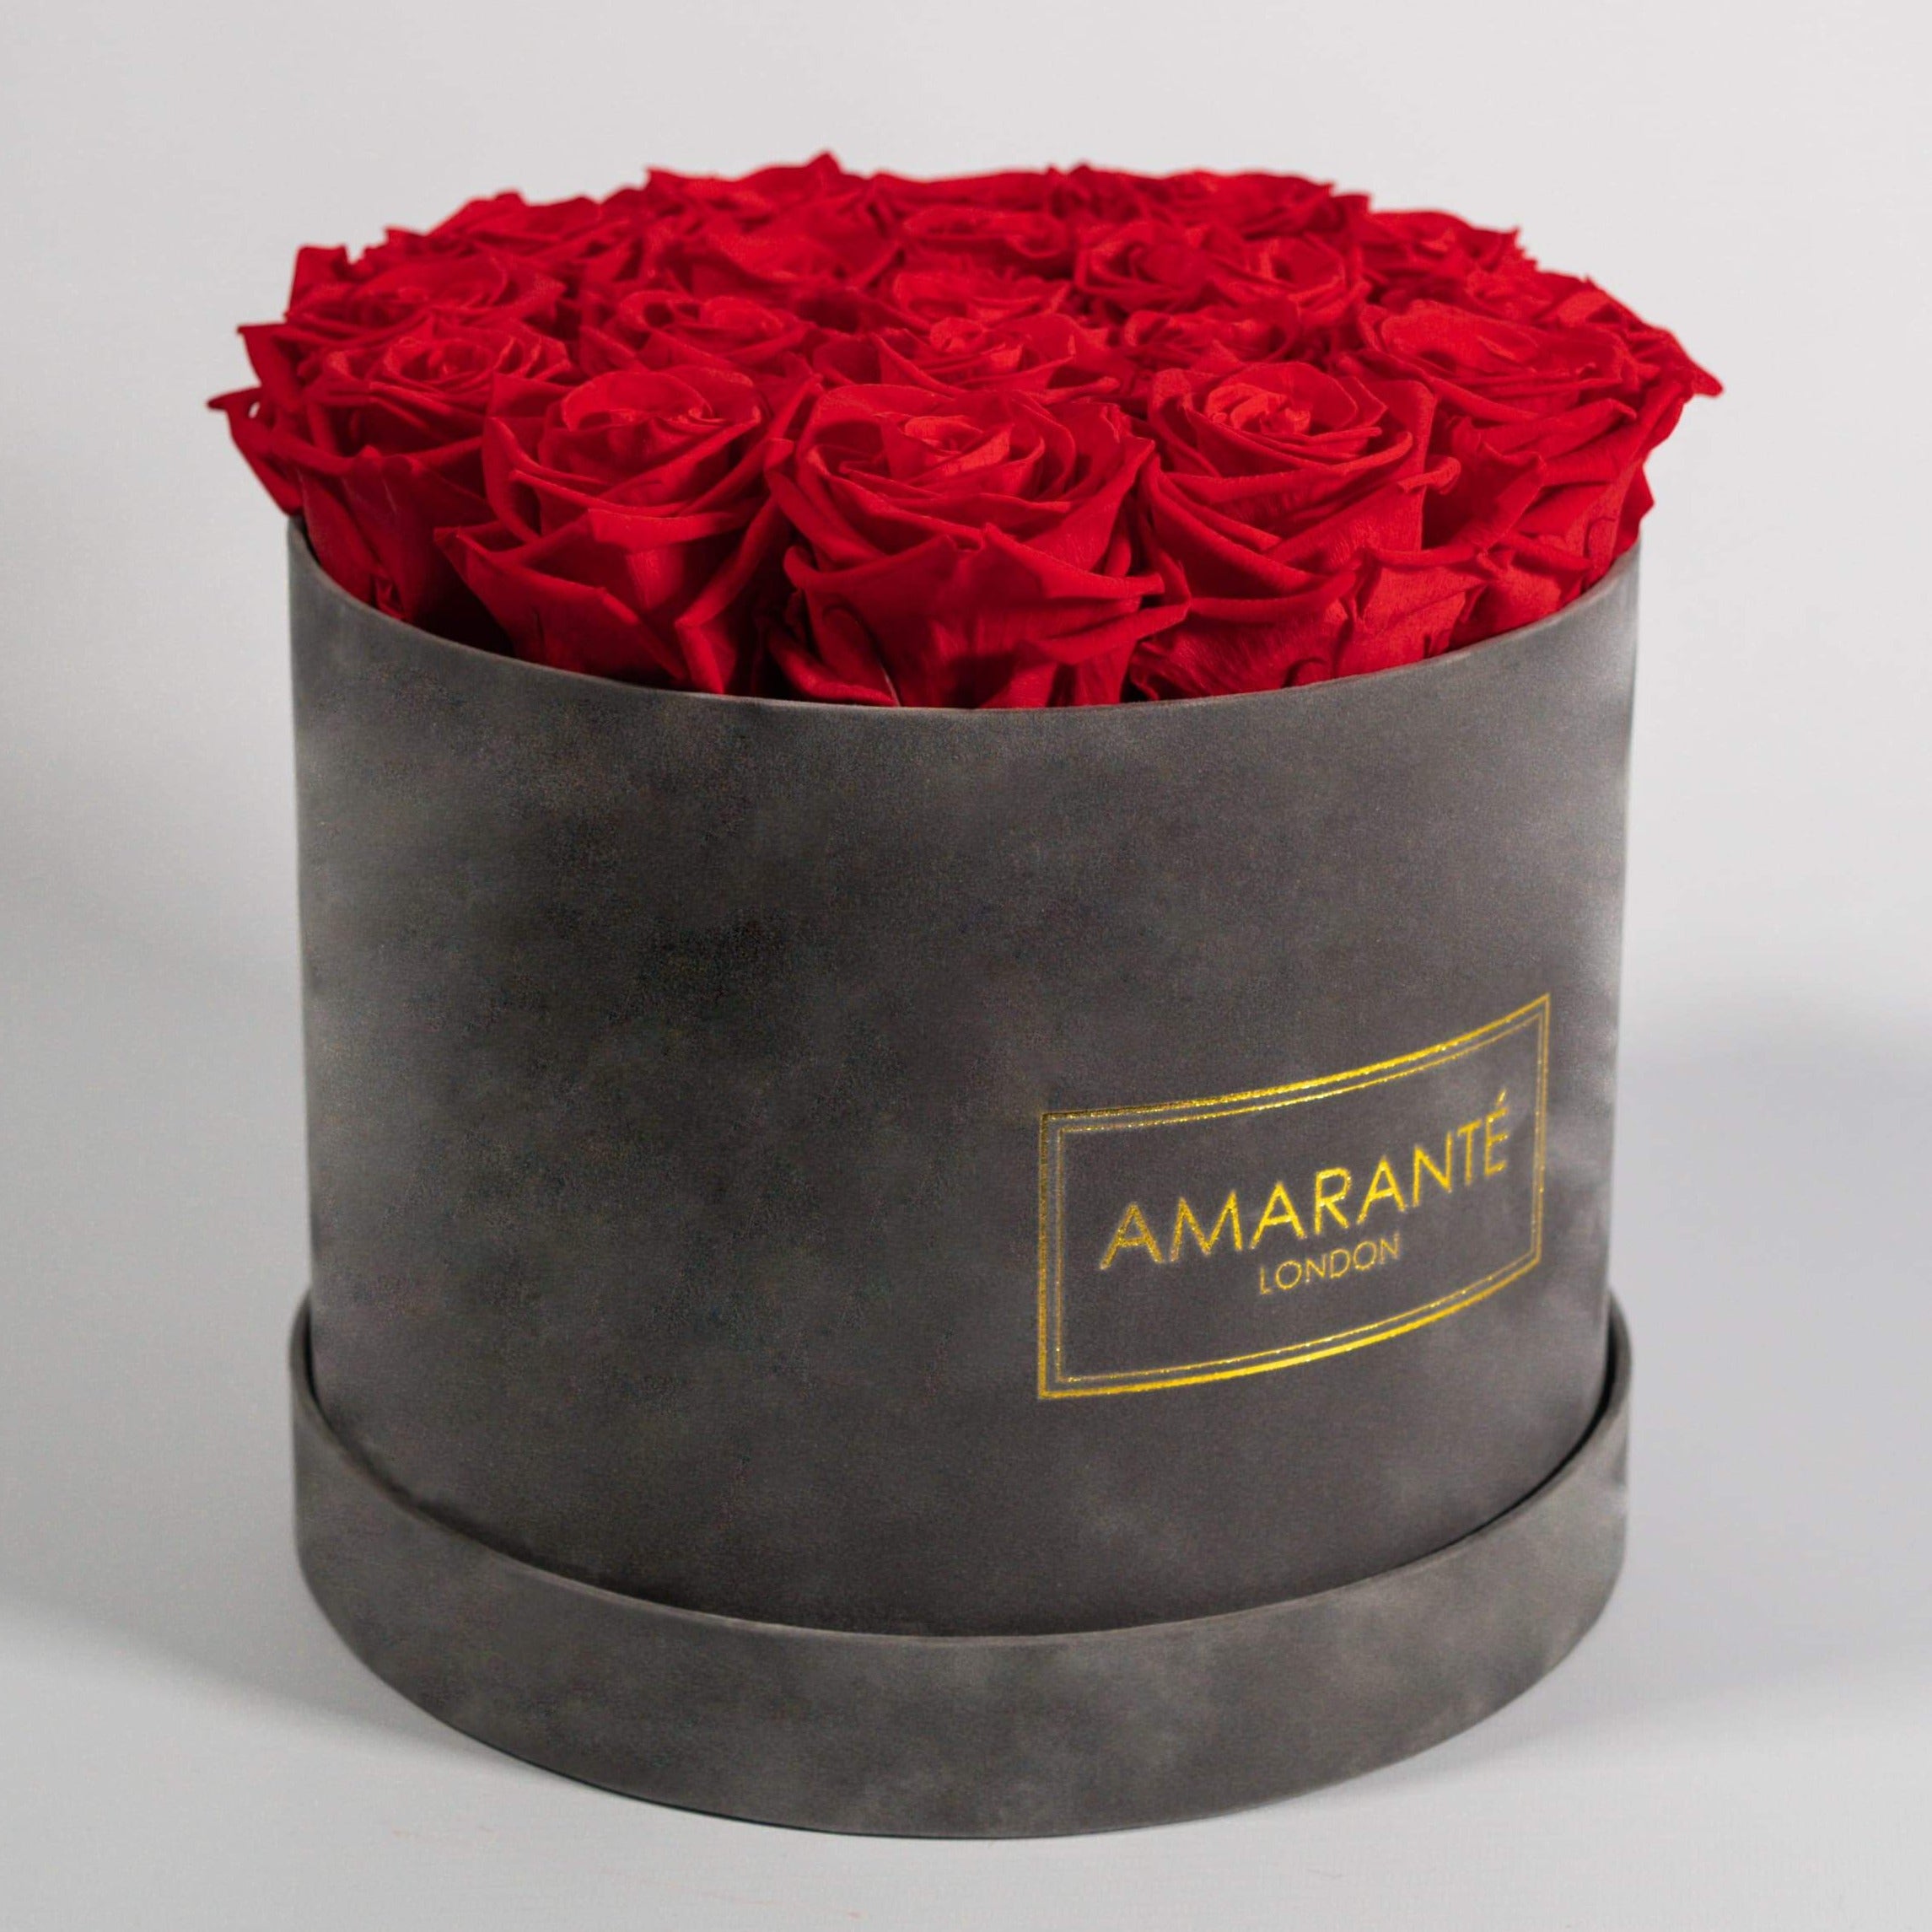 Divine red Roses in a dapper grey box, bursting with fiery colours